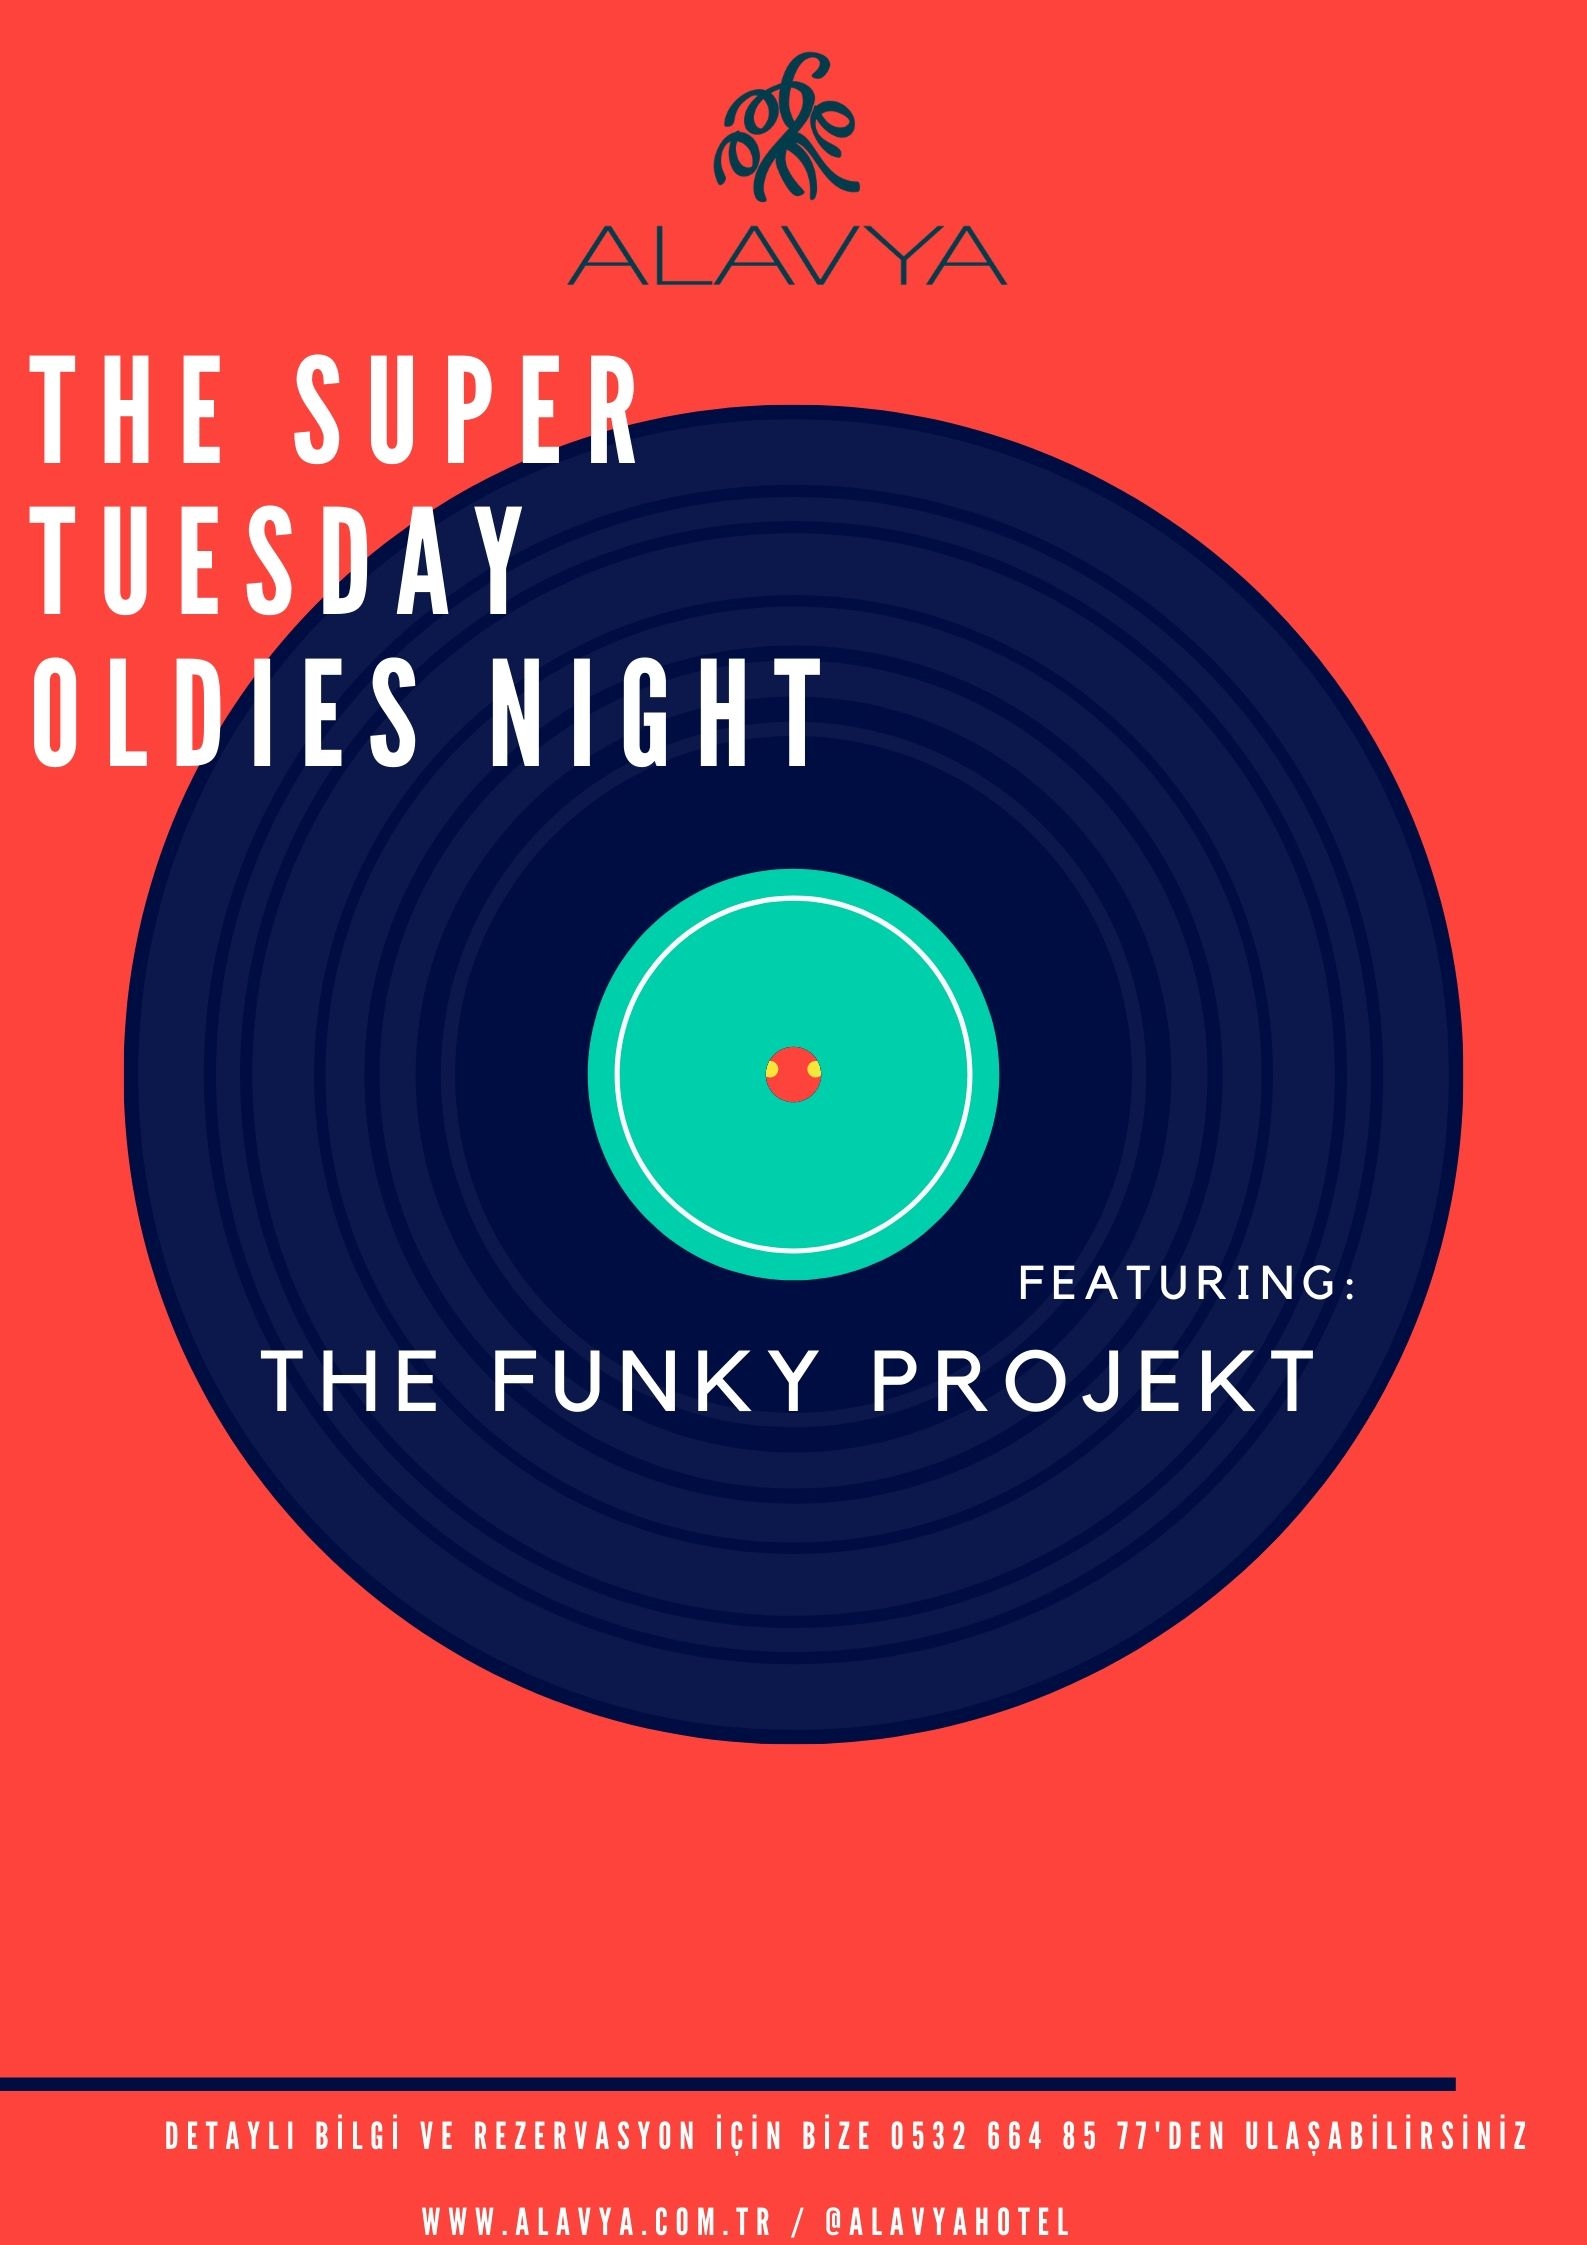 The Super Tuesday Oldies Night